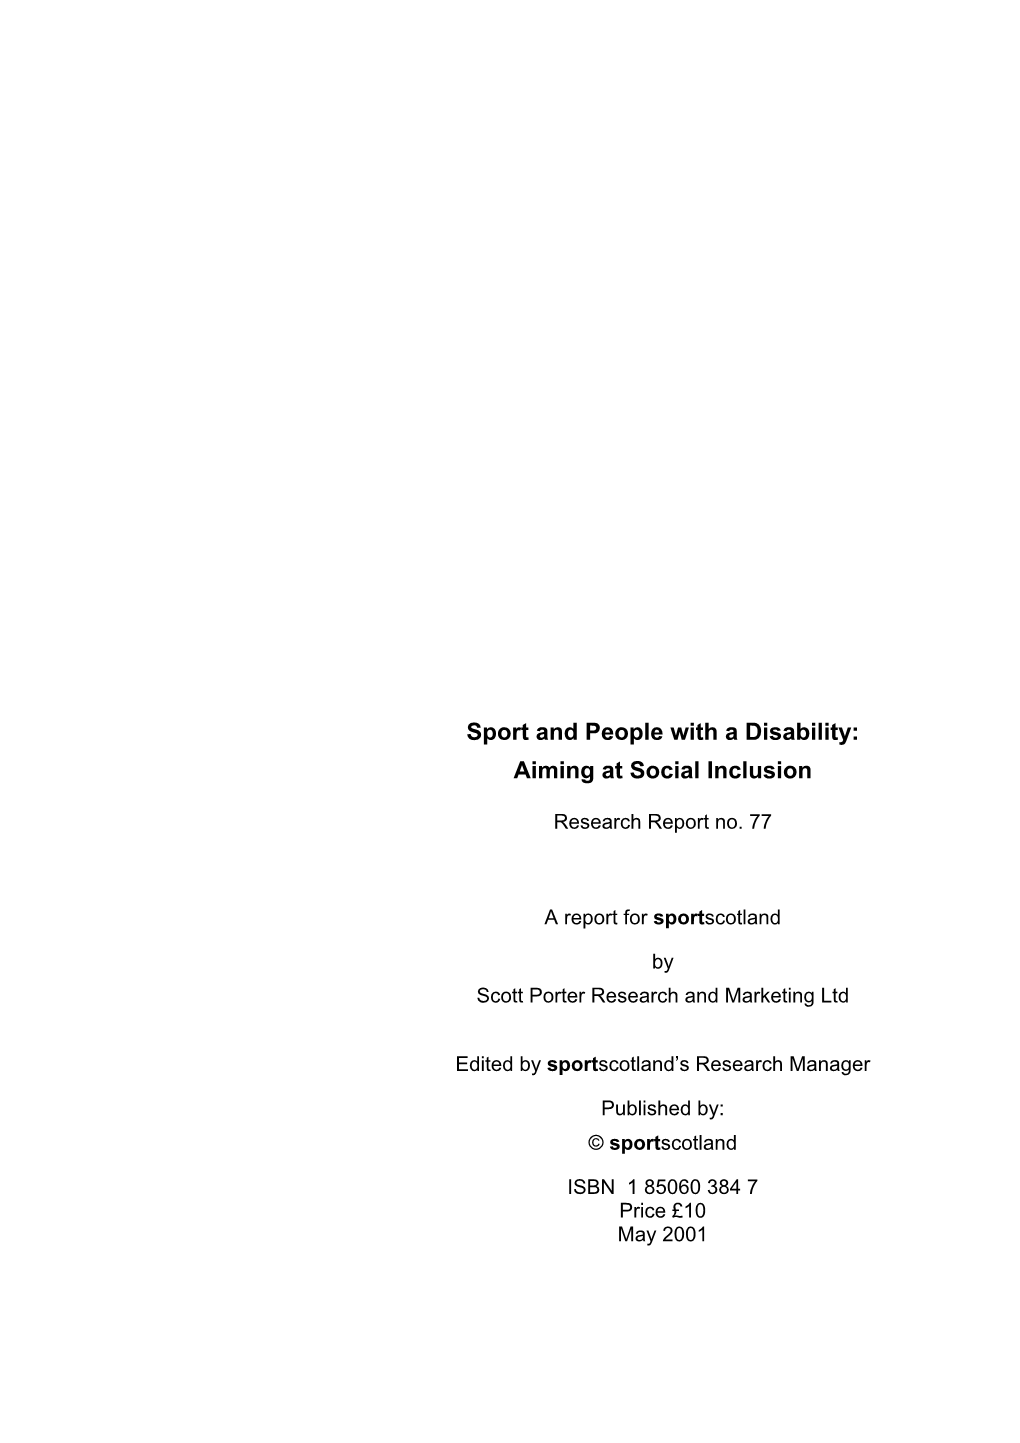 Sport and People with a Disability: Aiming at Social Inclusion